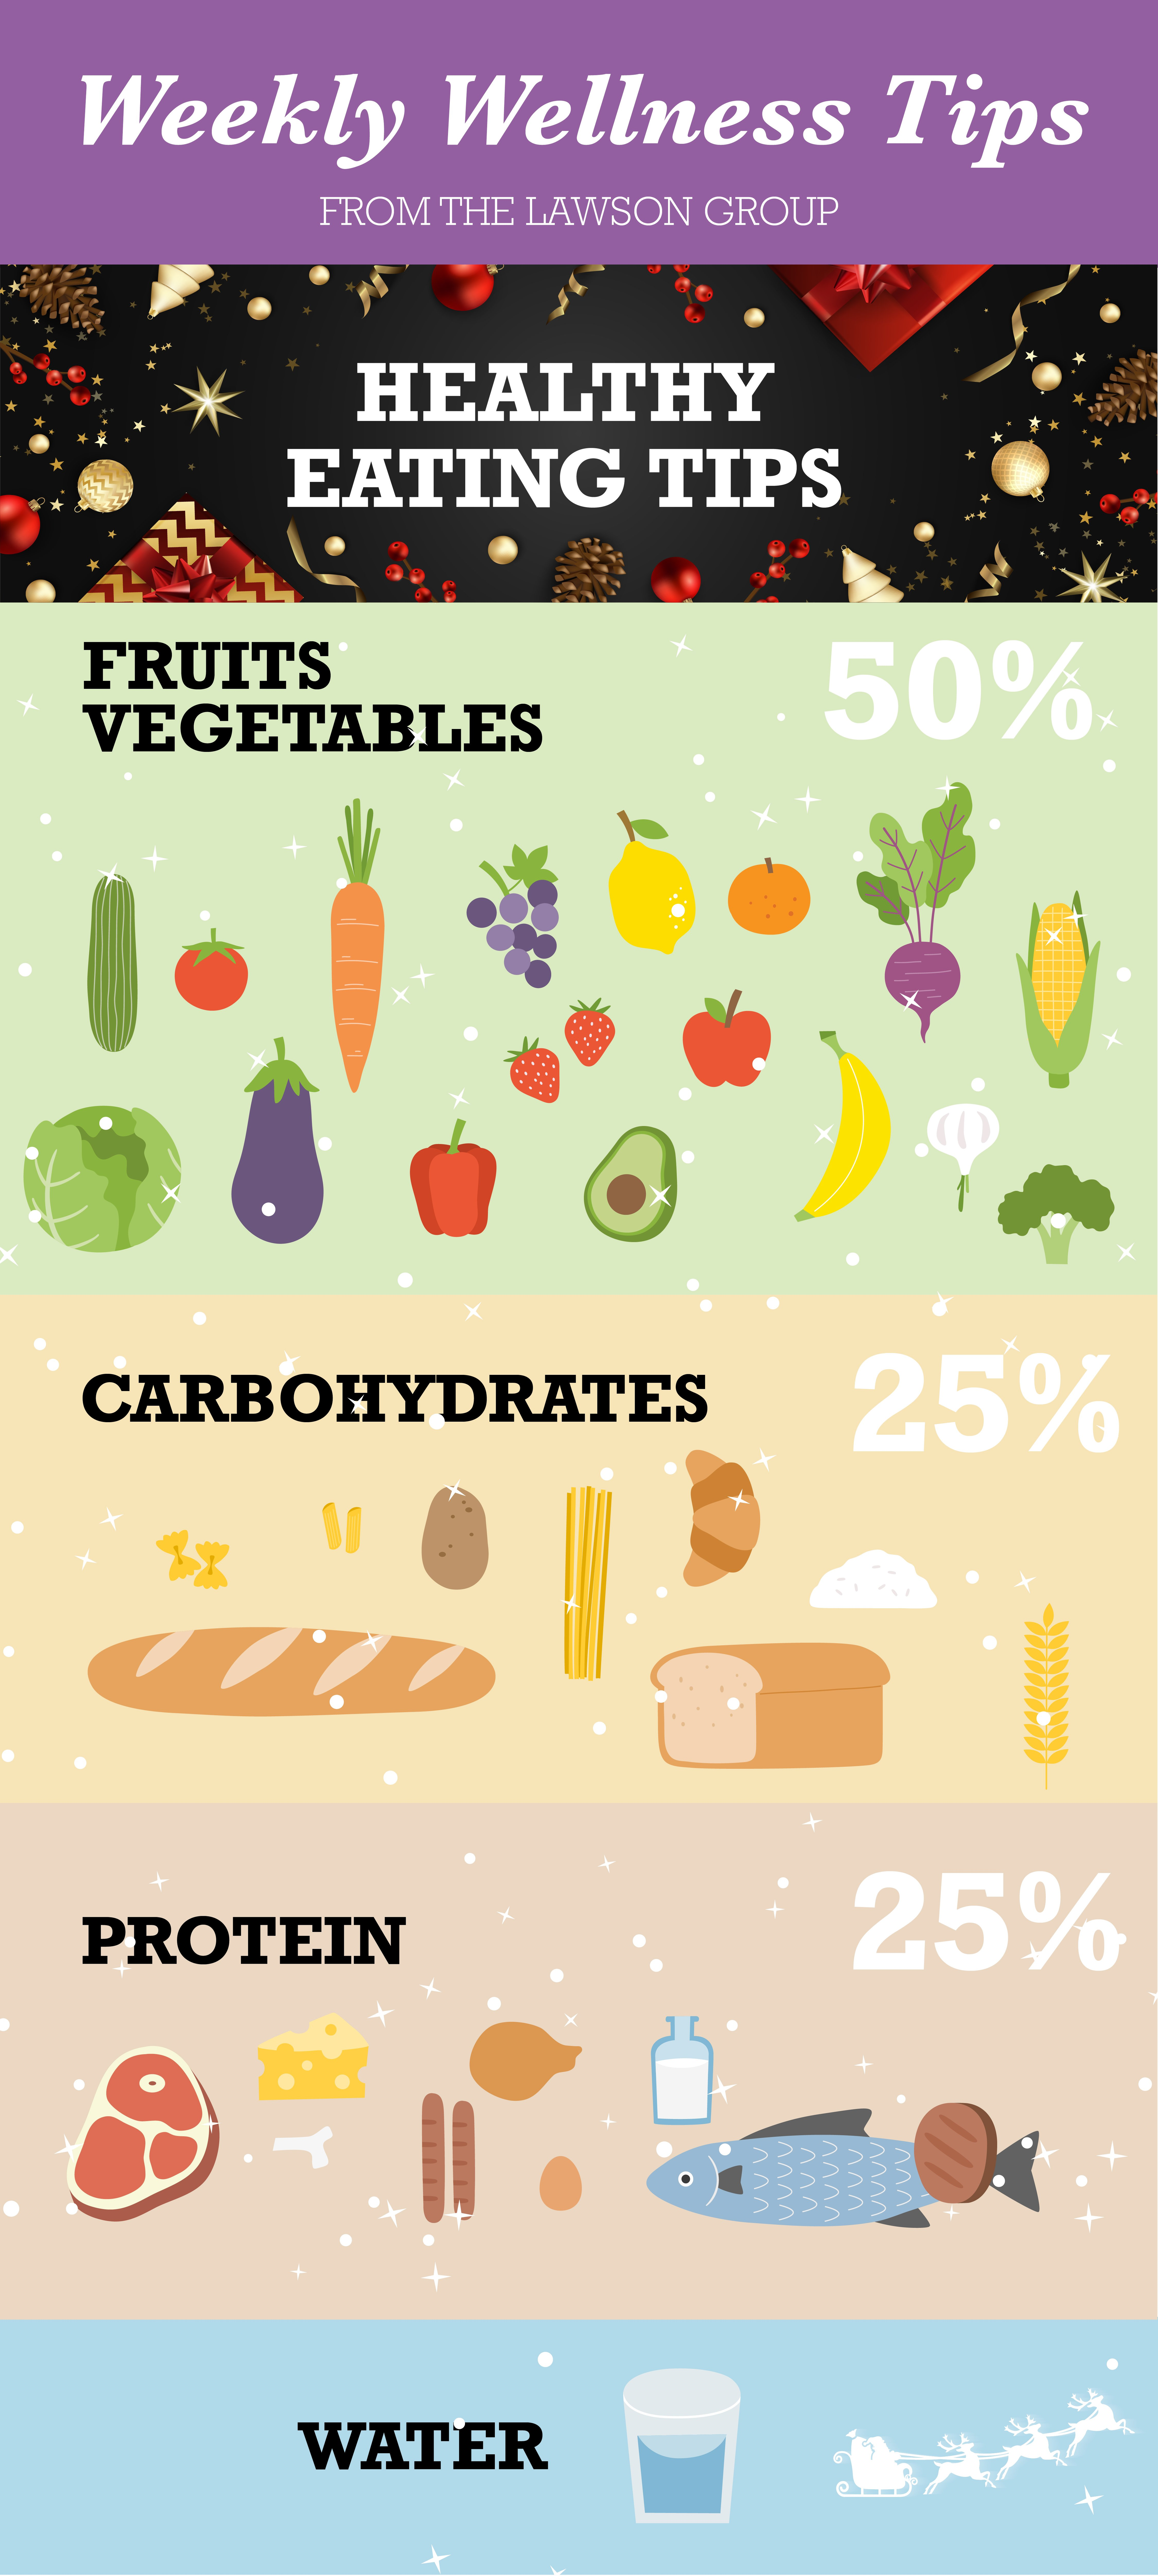 TLG22005 Wellness Tips Healthy Eating Tips Infographic-1080px-01